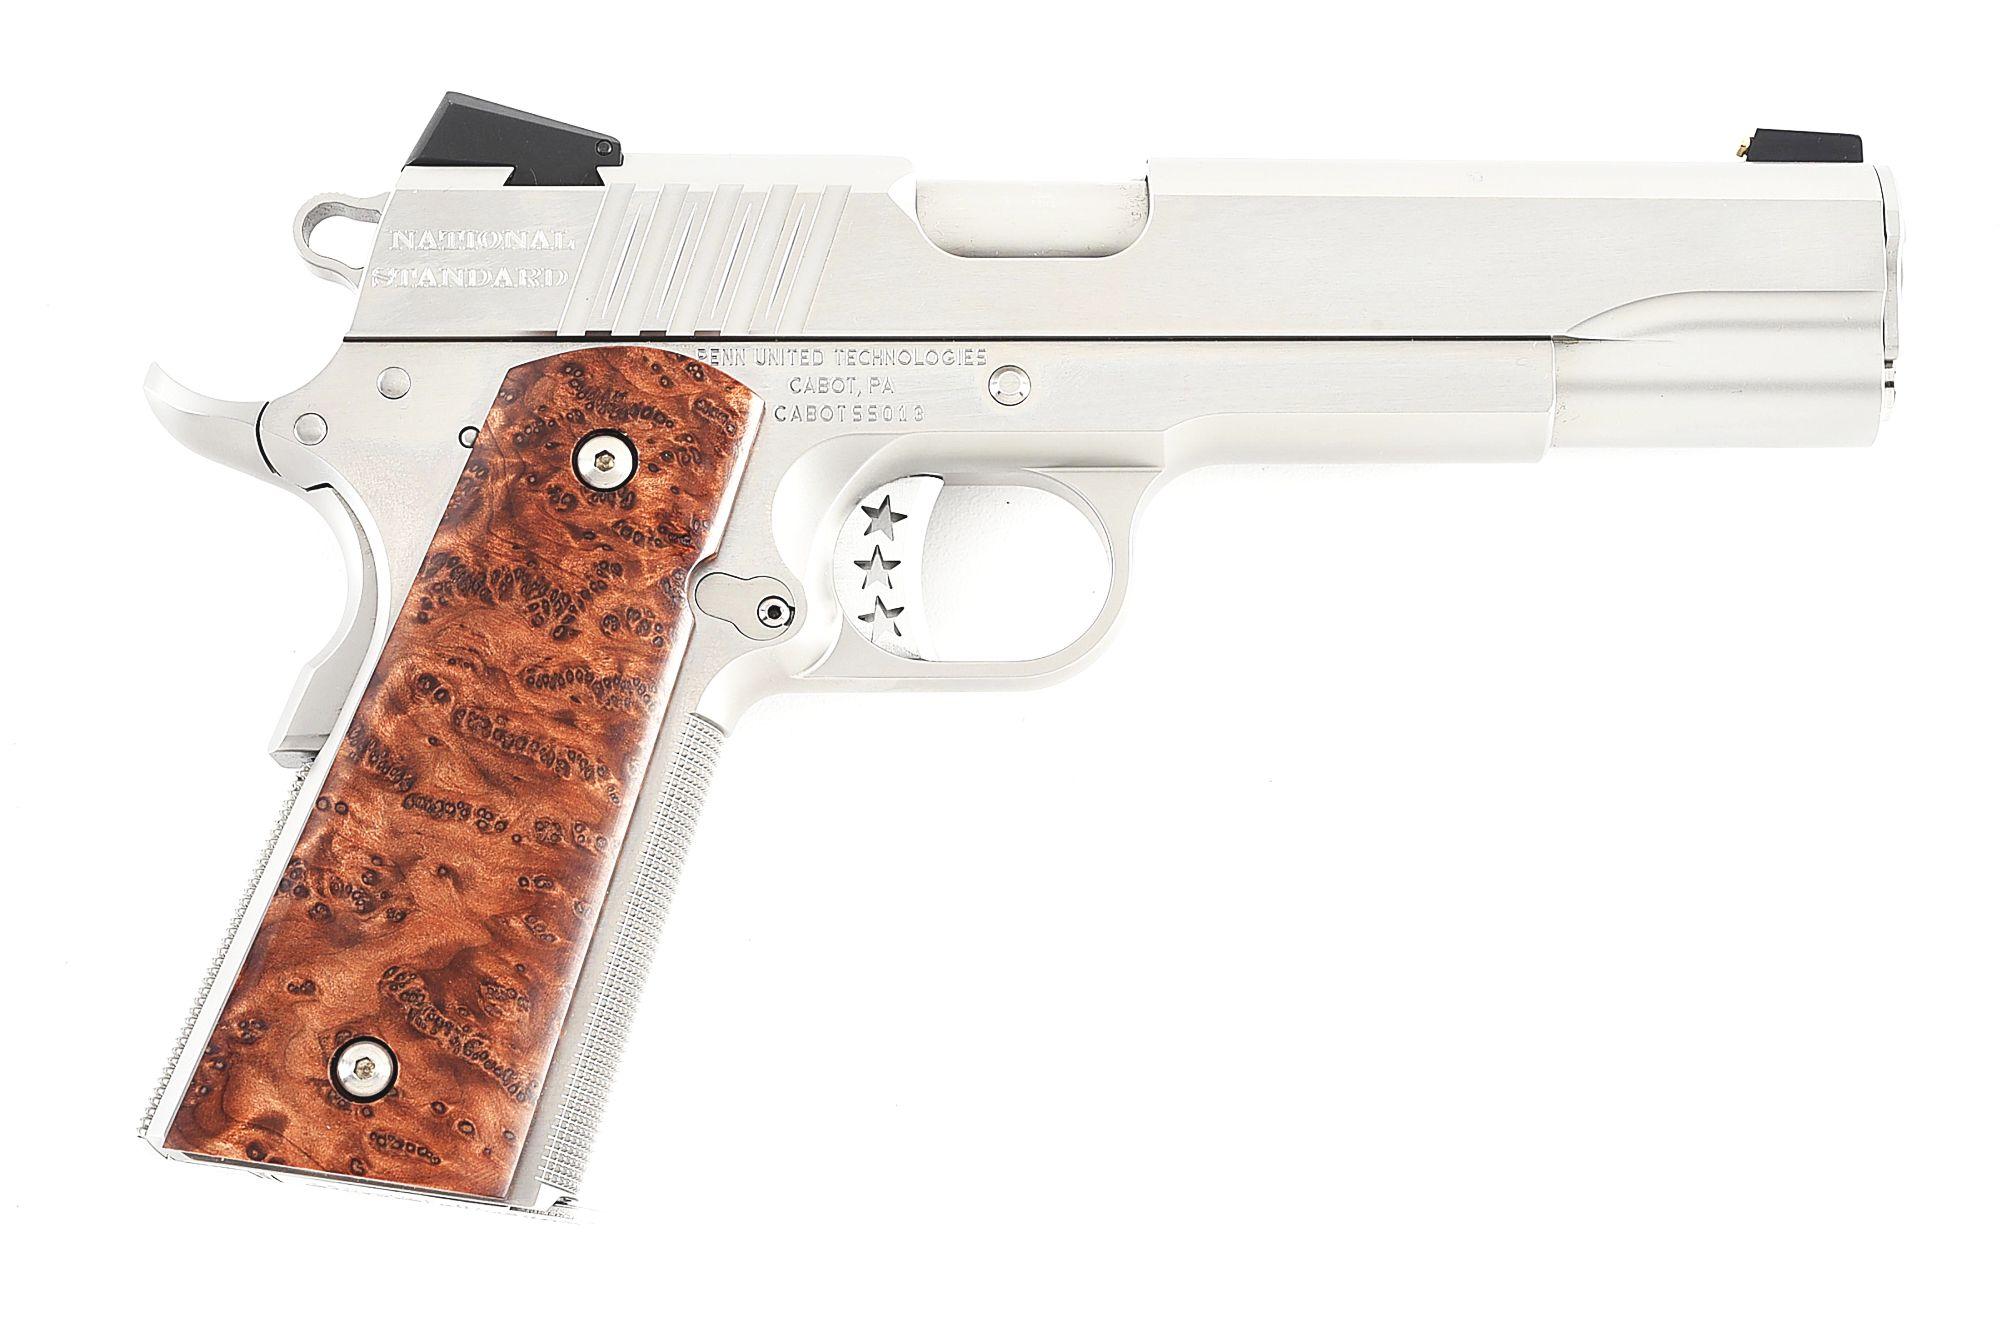 (M) CABOT GUNS NATIONAL STANDARD 1911A1 .45 ACP SEMI-AUTOMATIC PISTOL WITH CASE.